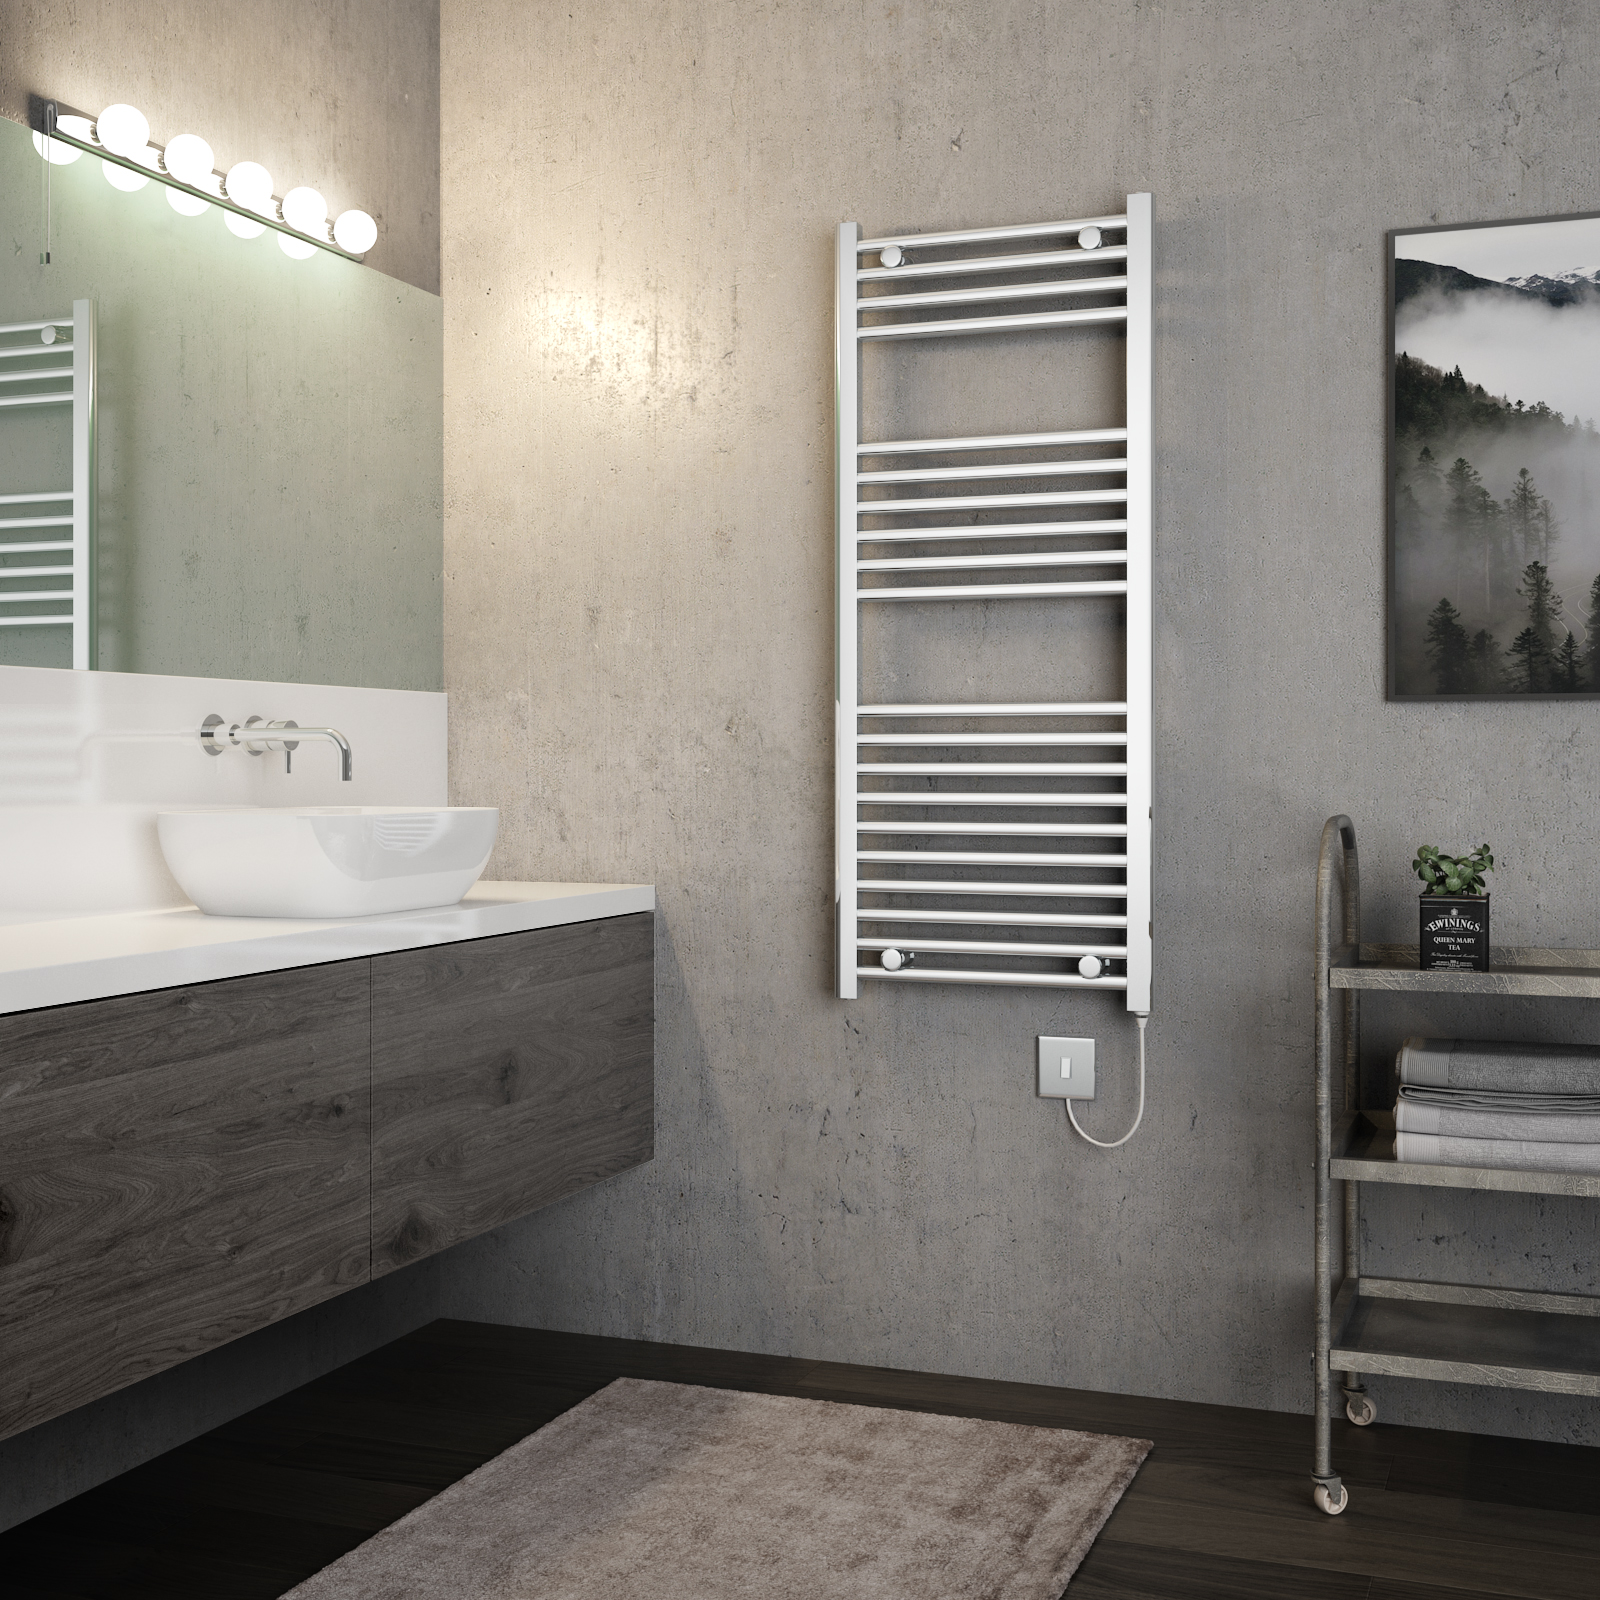 h x 1200mm w 600W 500mm Pre-filled Electric "Apollo" Anthracite Towel Rail 